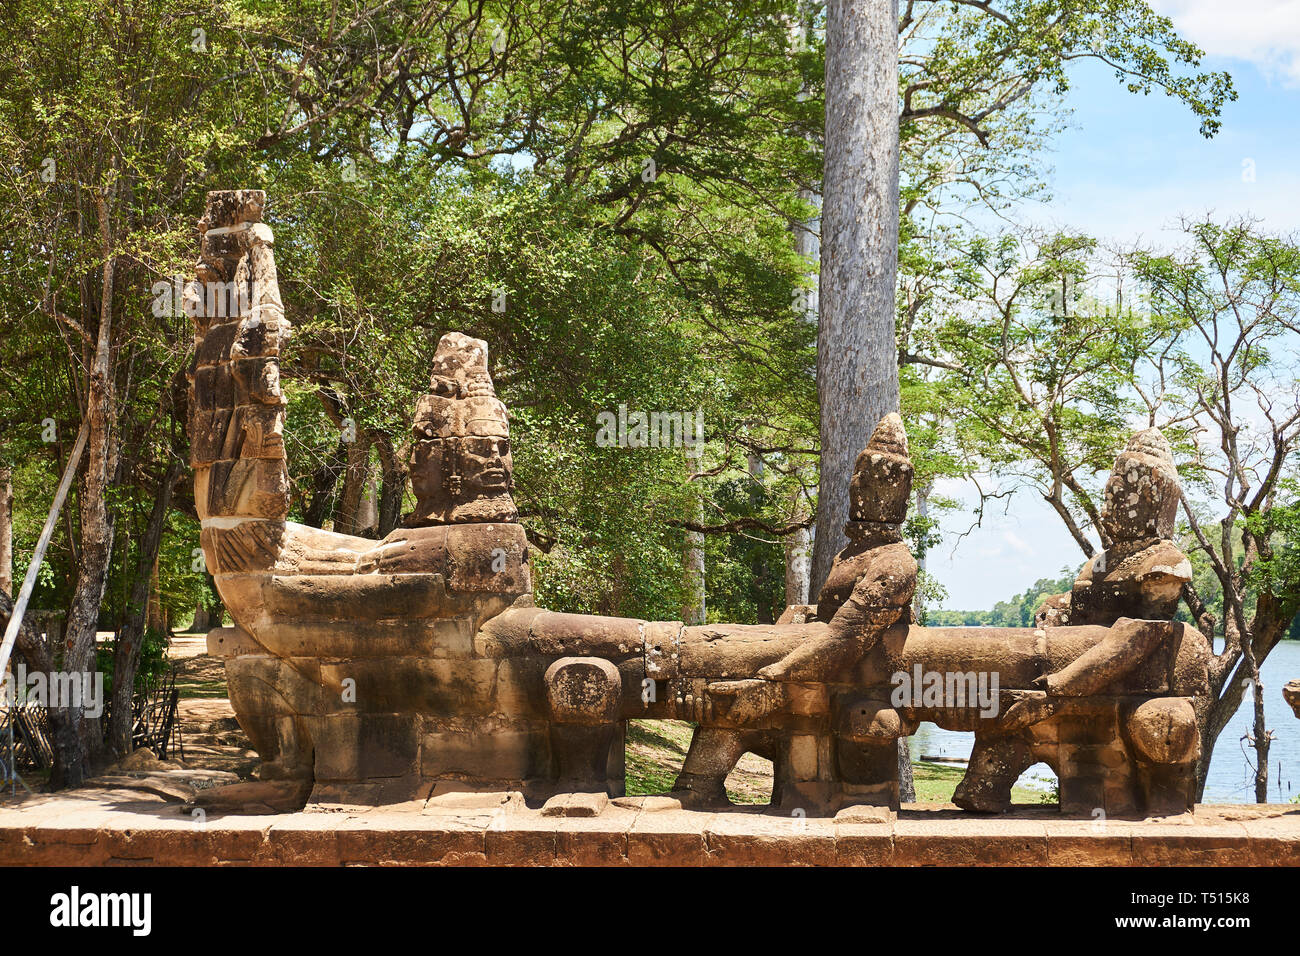 Sandstone deva statues holding the body of a nine-headed Naga king Shesha, south gate of Angkor Thom in the Angkor Archaeological Park, Cambodia. Stock Photo